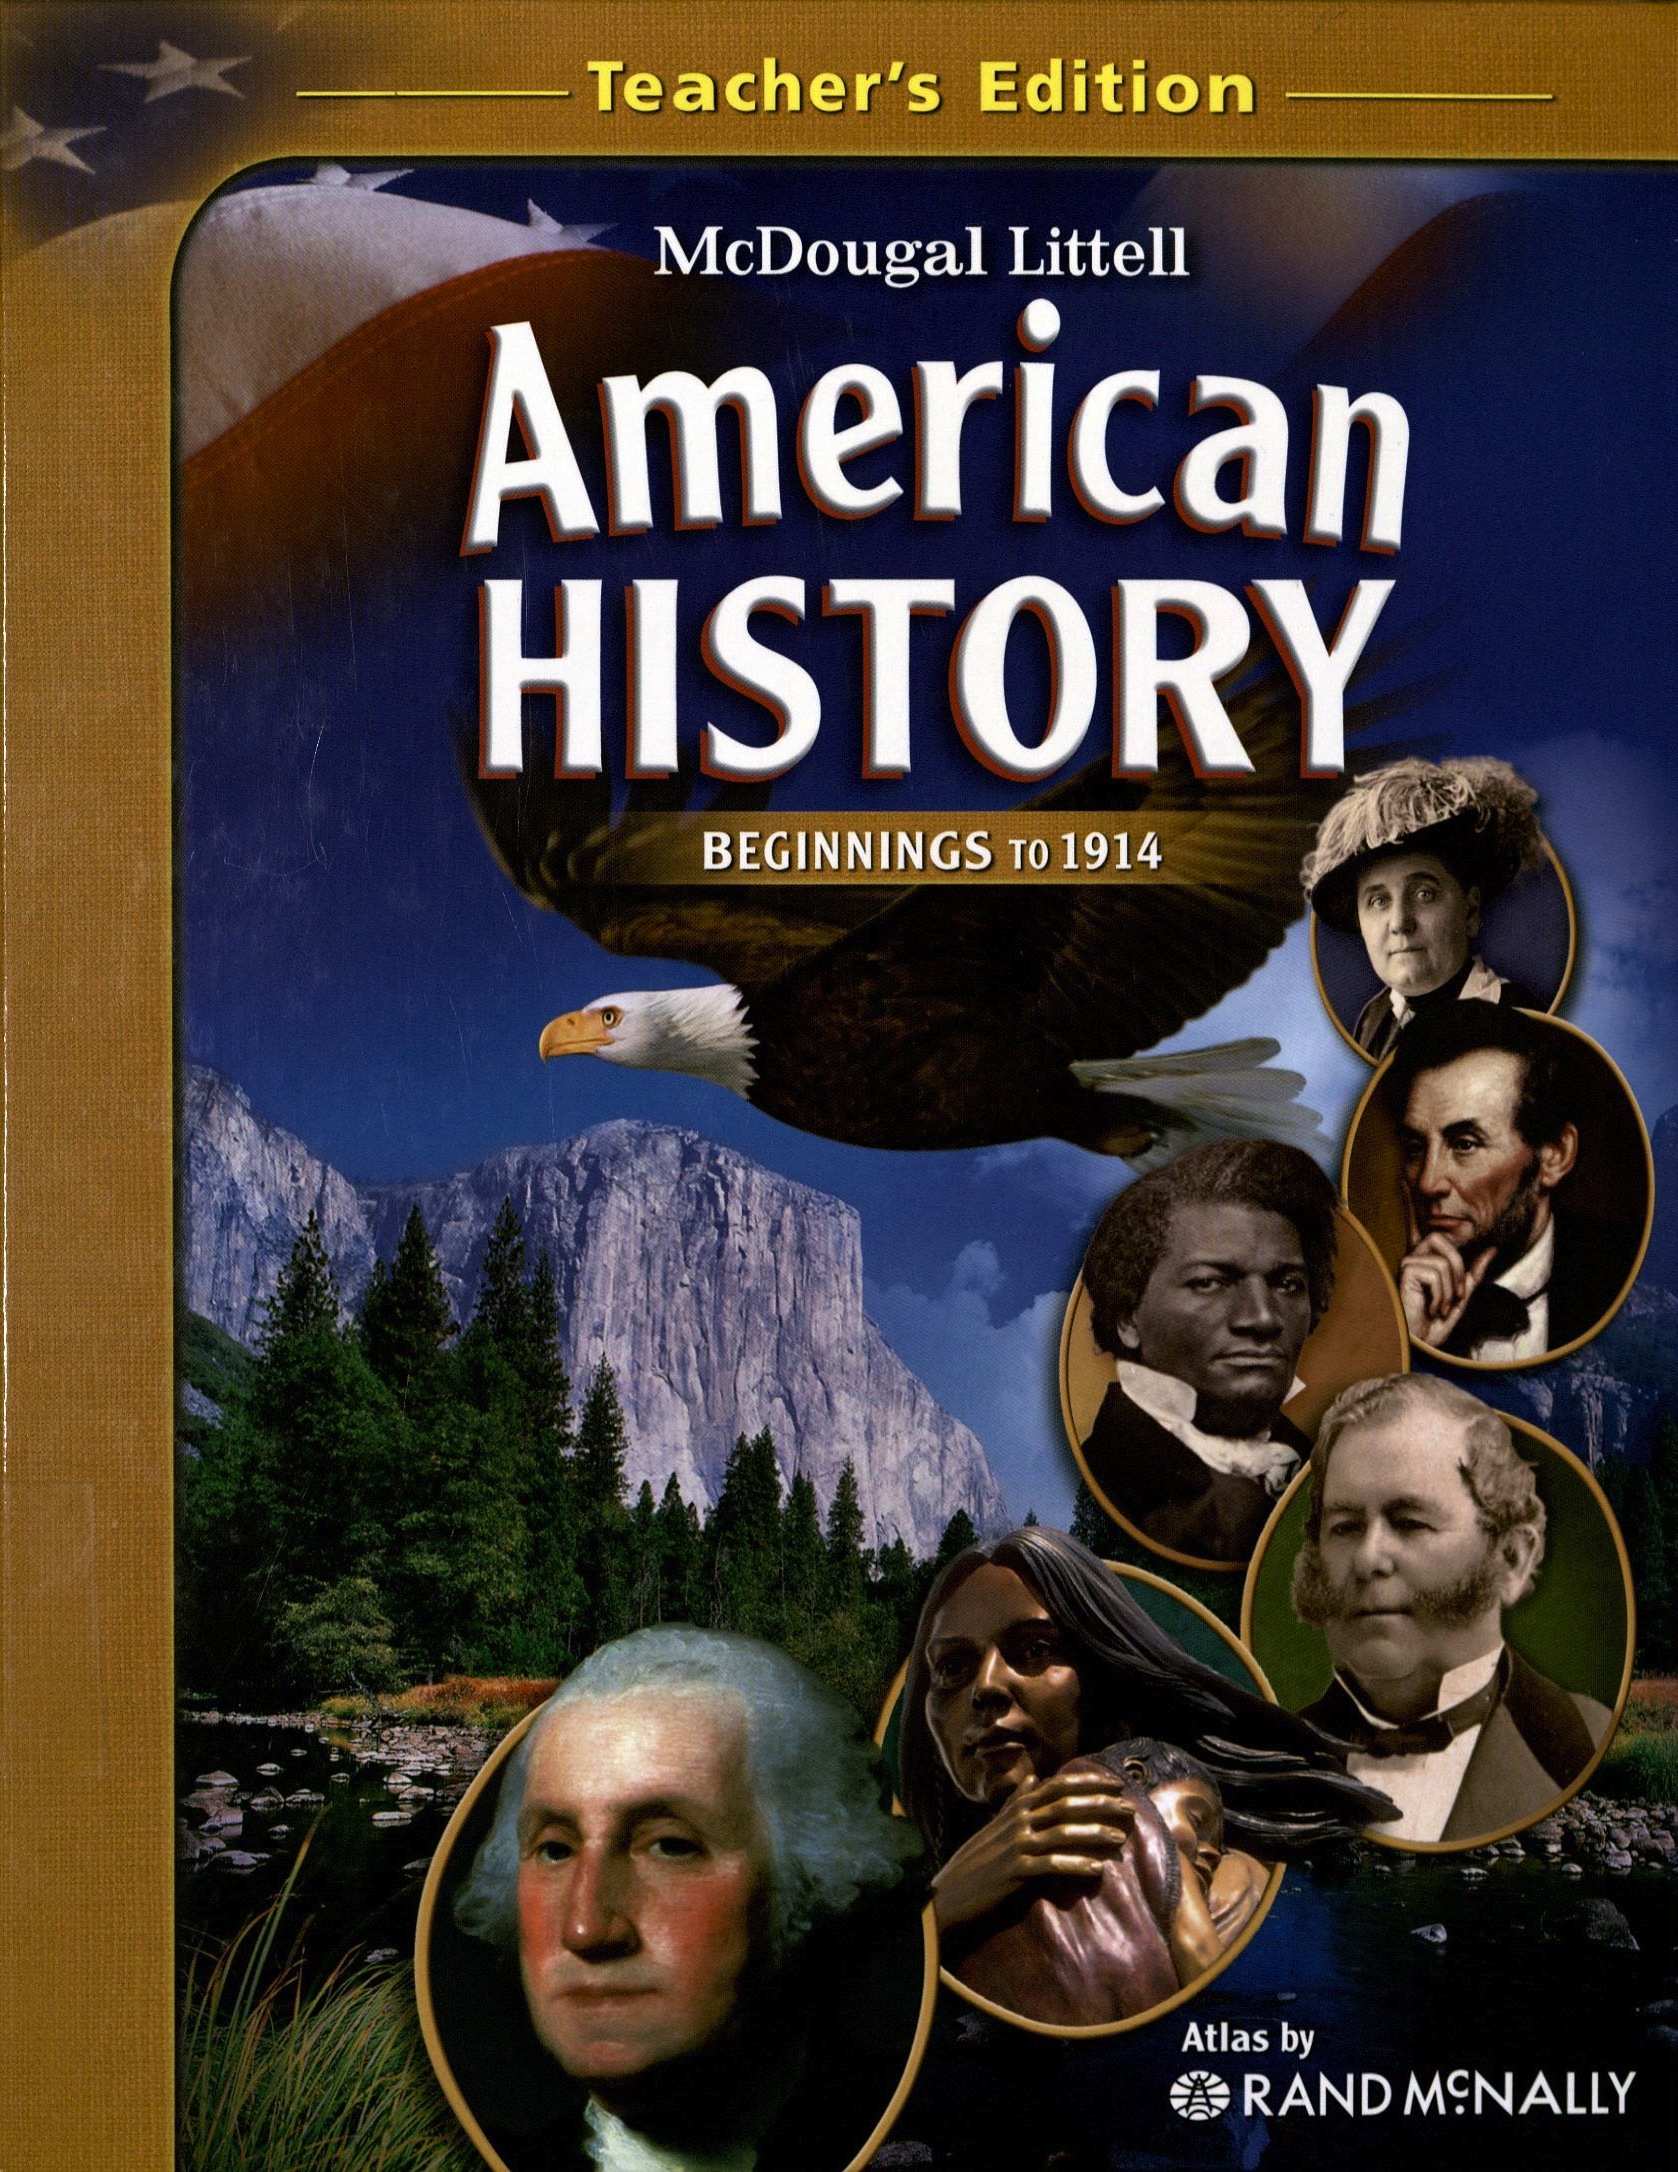 the americans history textbook